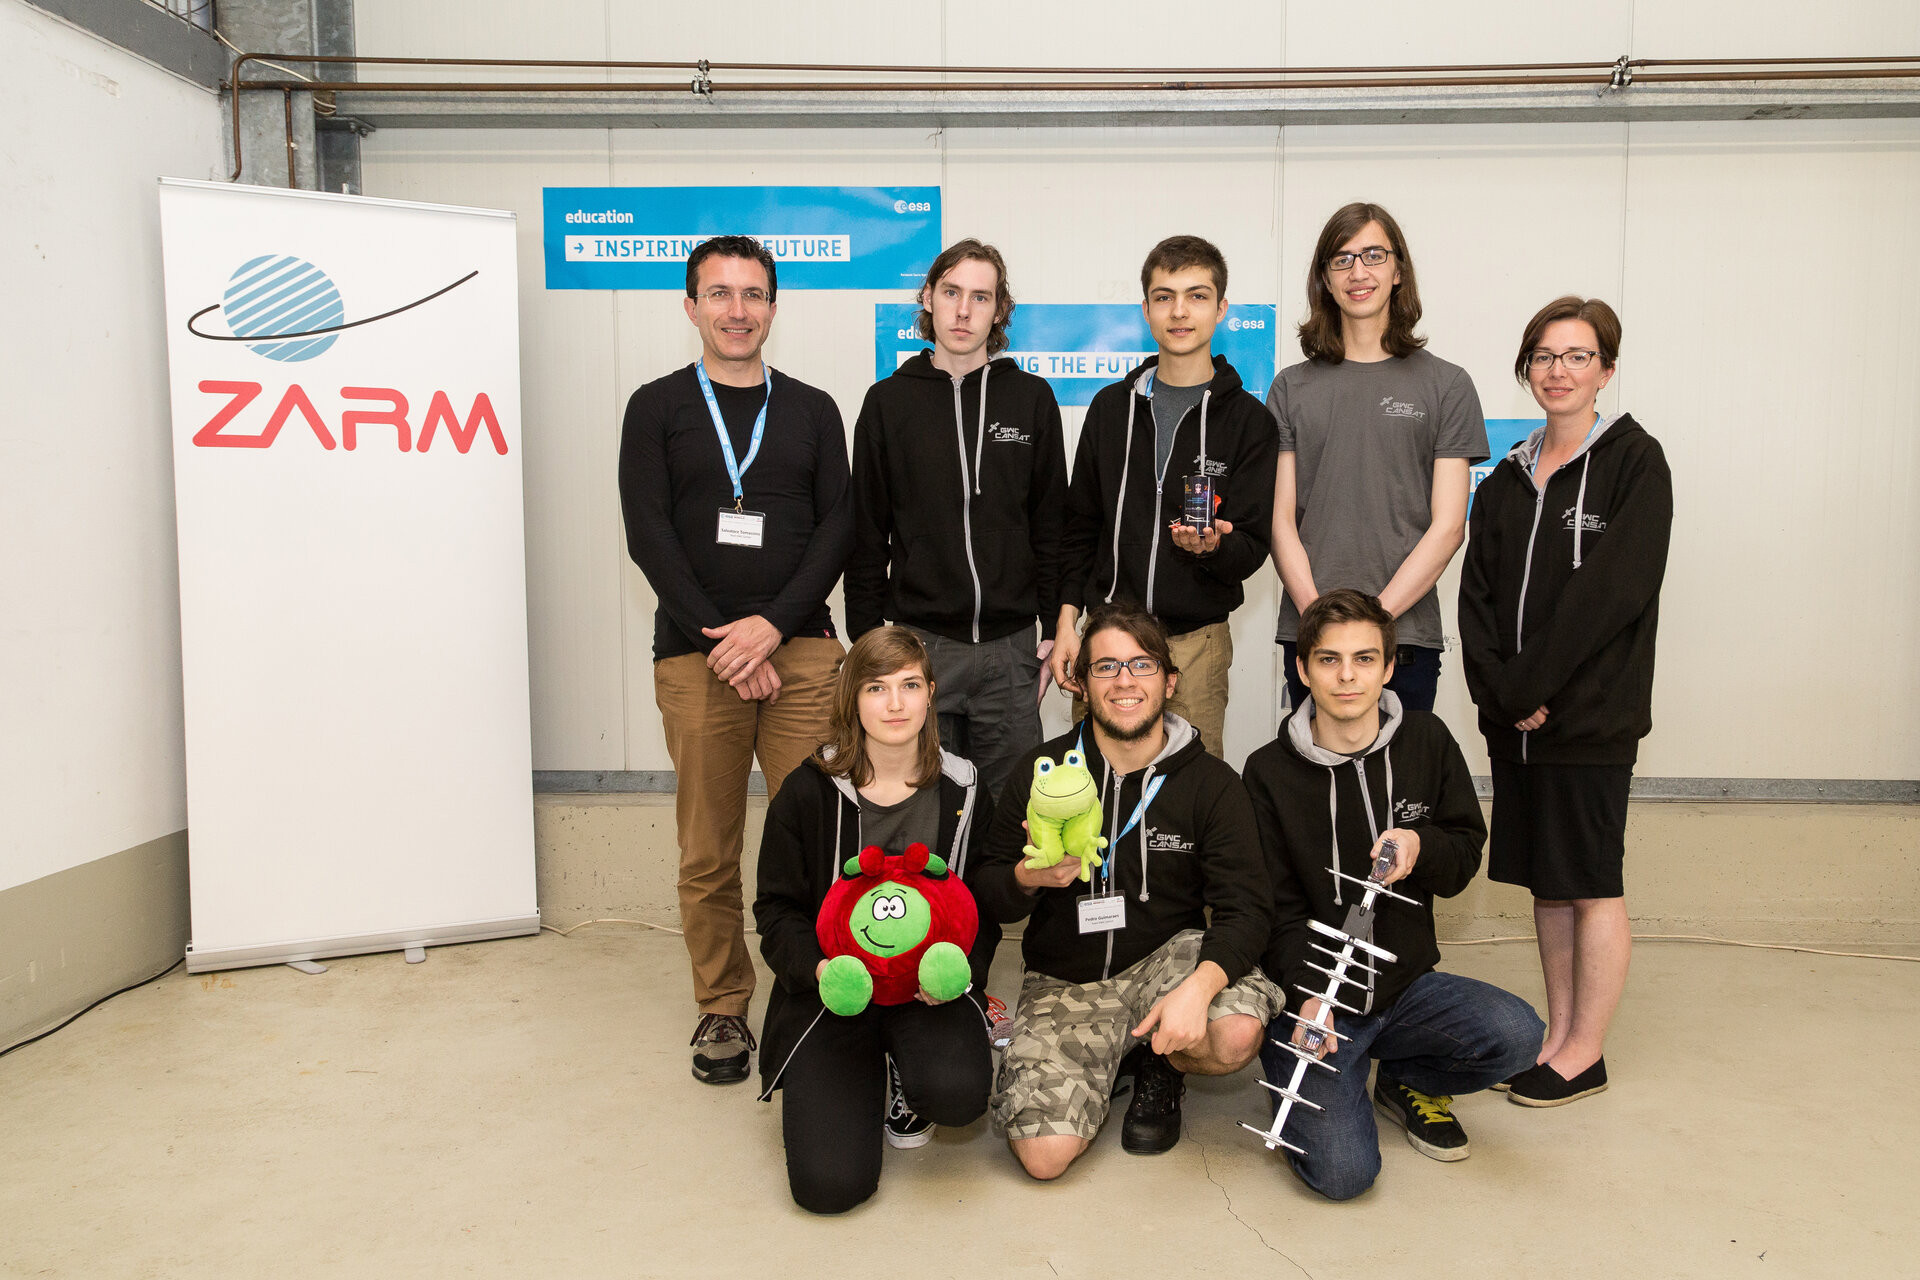 Team GWC, winners of the best report,  with their CanSat and mascot